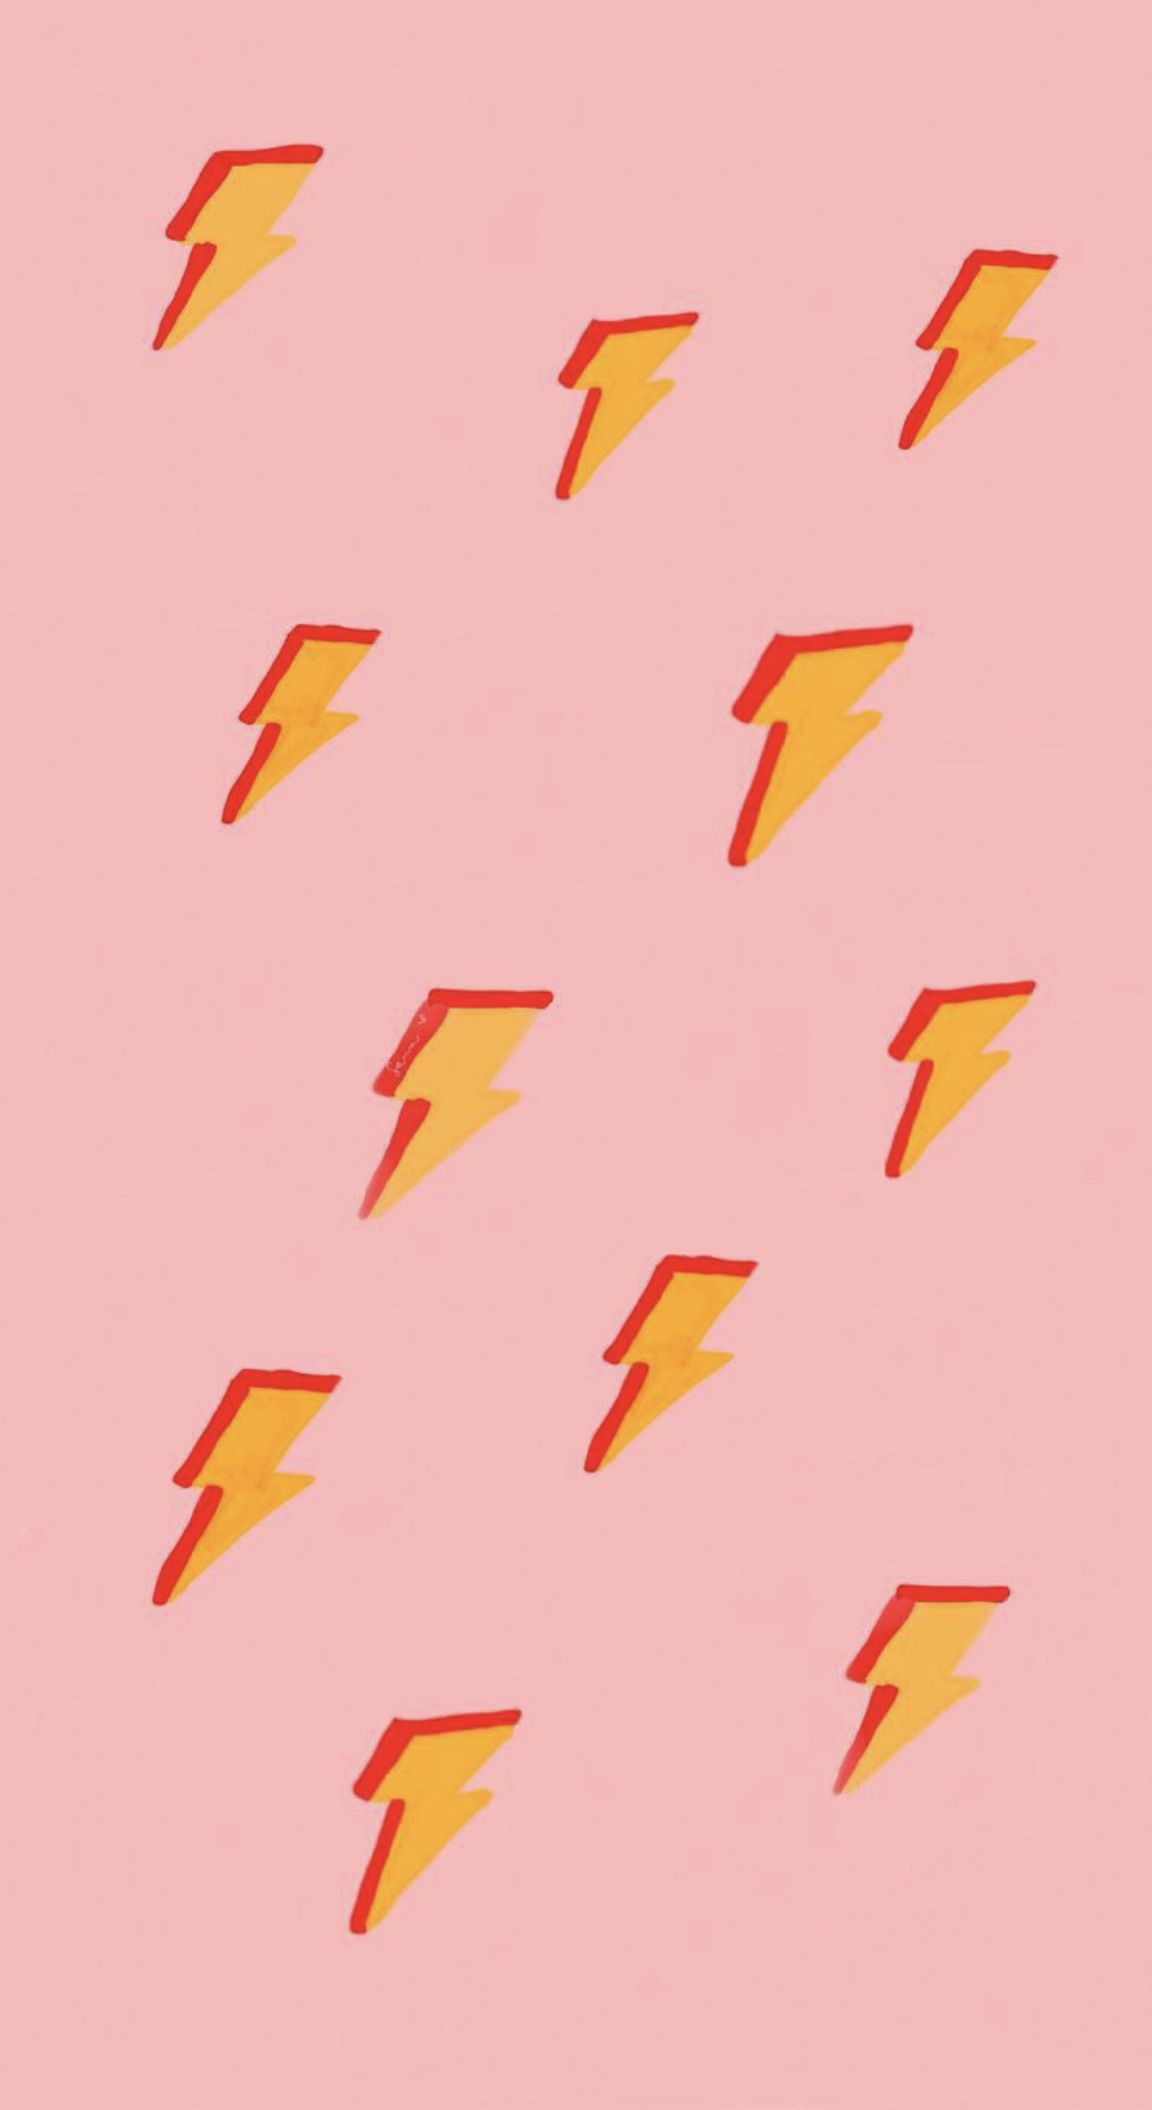 Lightning Bolt iPhone Wallpaper with high-resolution 1080x1920 pixel. You can use this wallpaper for your iPhone 5, 6, 7, 8, X, XS, XR backgrounds, Mobile Screensaver, or iPad Lock Screen - Colorful